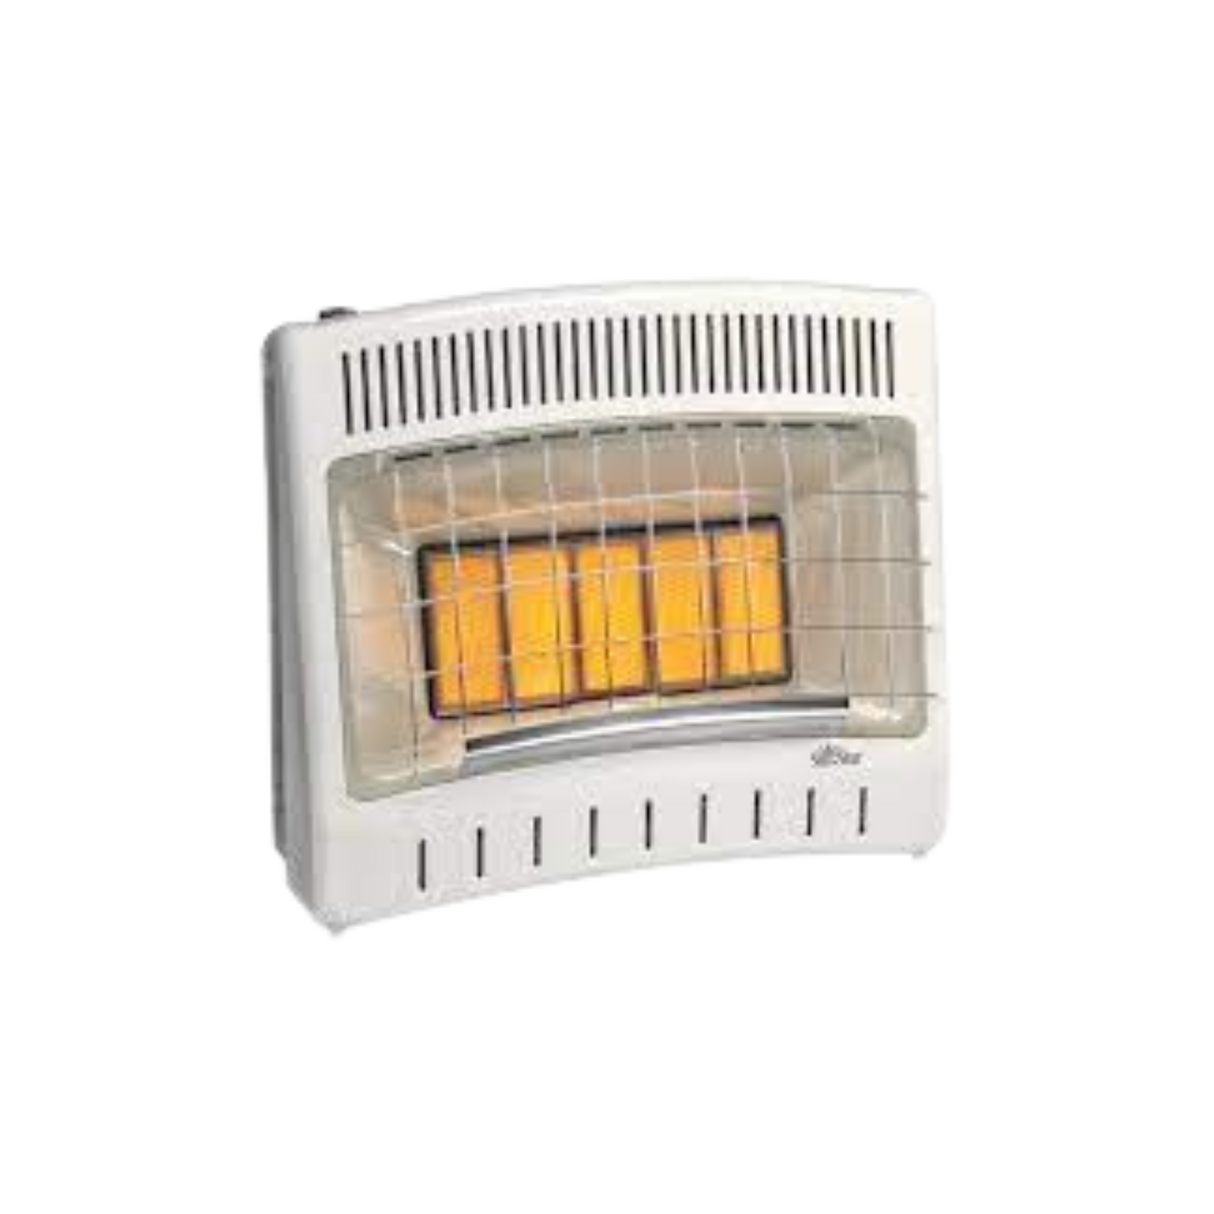 Sunstar Heating Products SC30T-LP 27000 BTU Thermostatic Vent Free Infrared/Radiant Heater, LP Gas